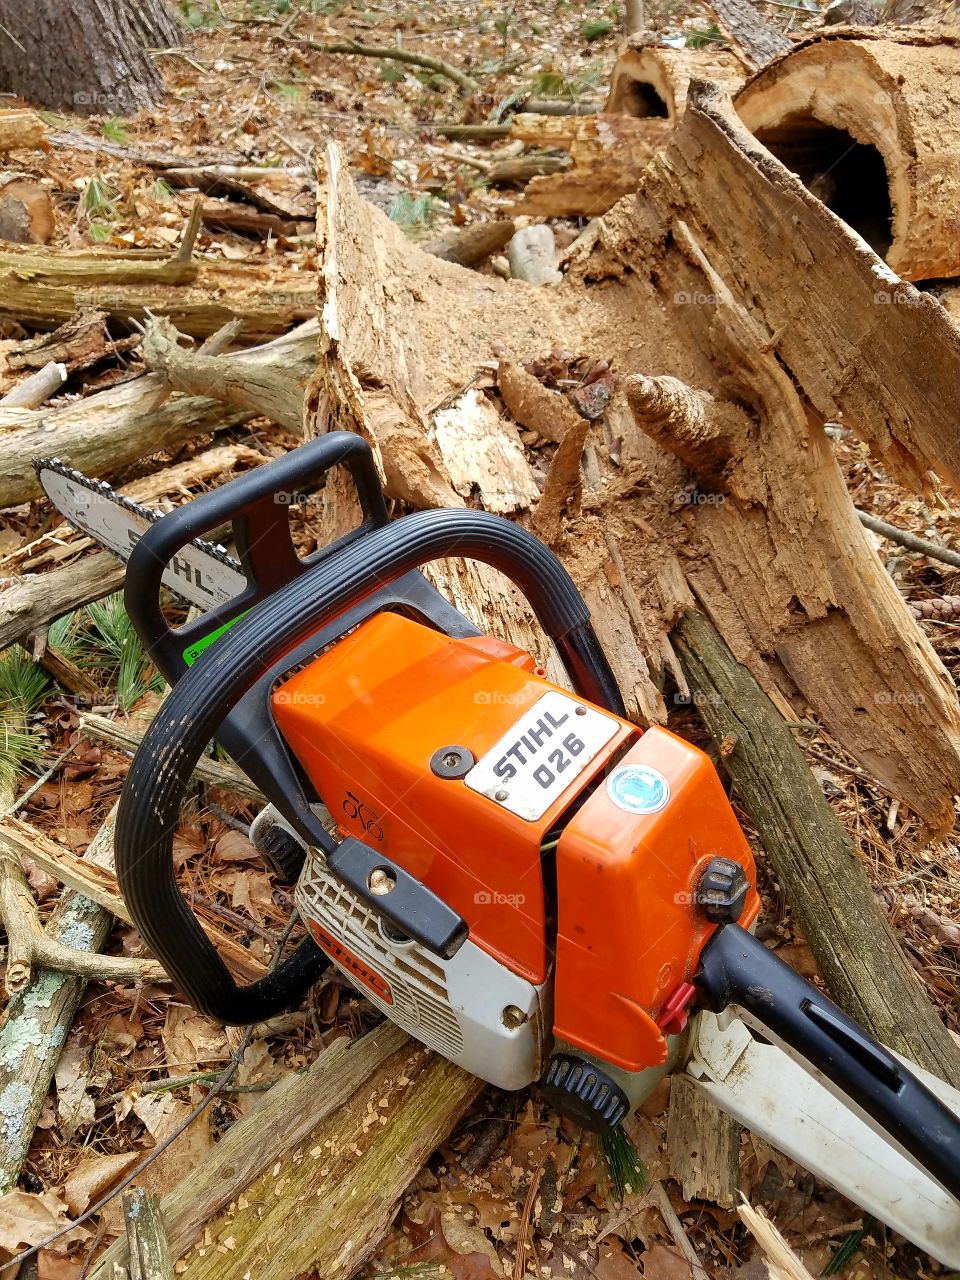 Stihl 026 gas chainsaw after cutting wood in a grove. Older Stihl in excellent working shape.